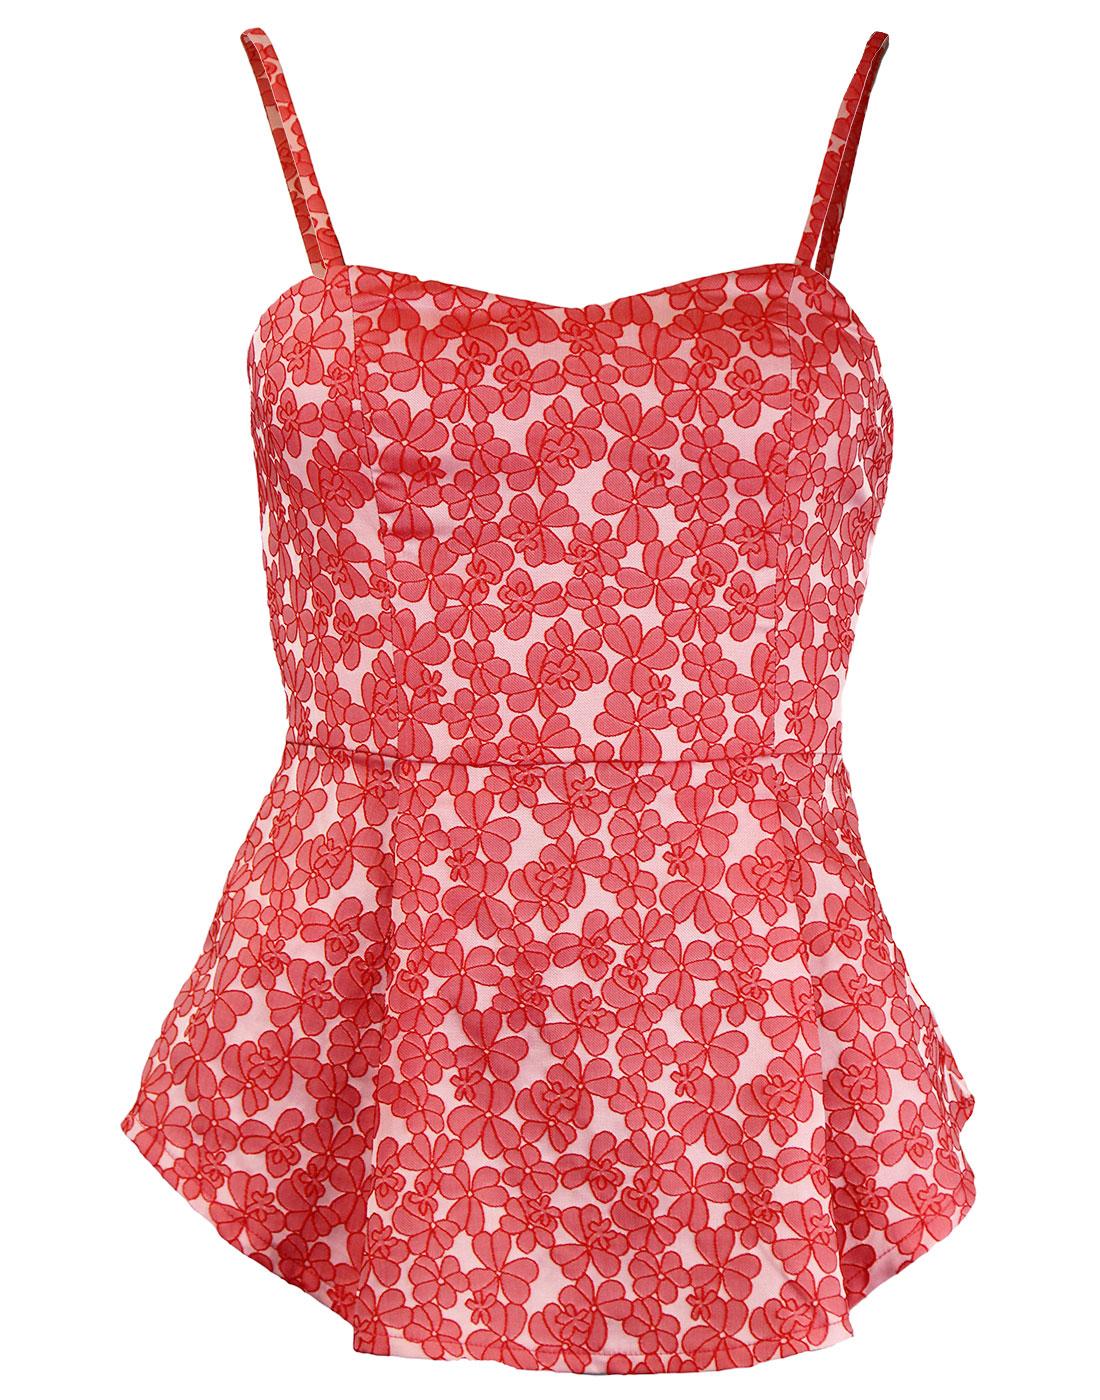 TRAFFIC PEOPLE Falling Flowers Retro 70s Bandeau Top in Red